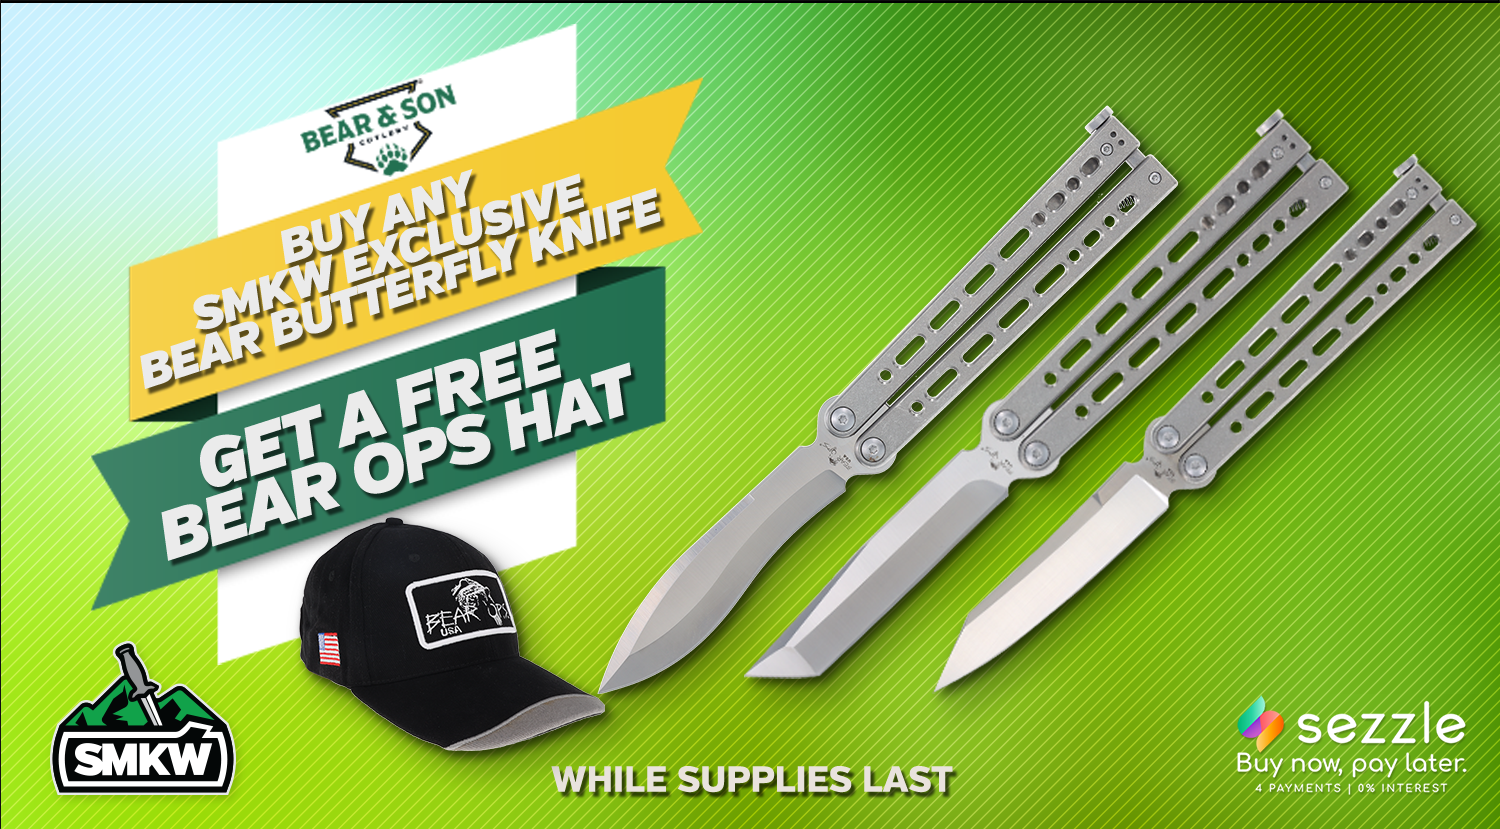 Get a Bear Ops Hat with select Bear Butterfly Knife Purchase